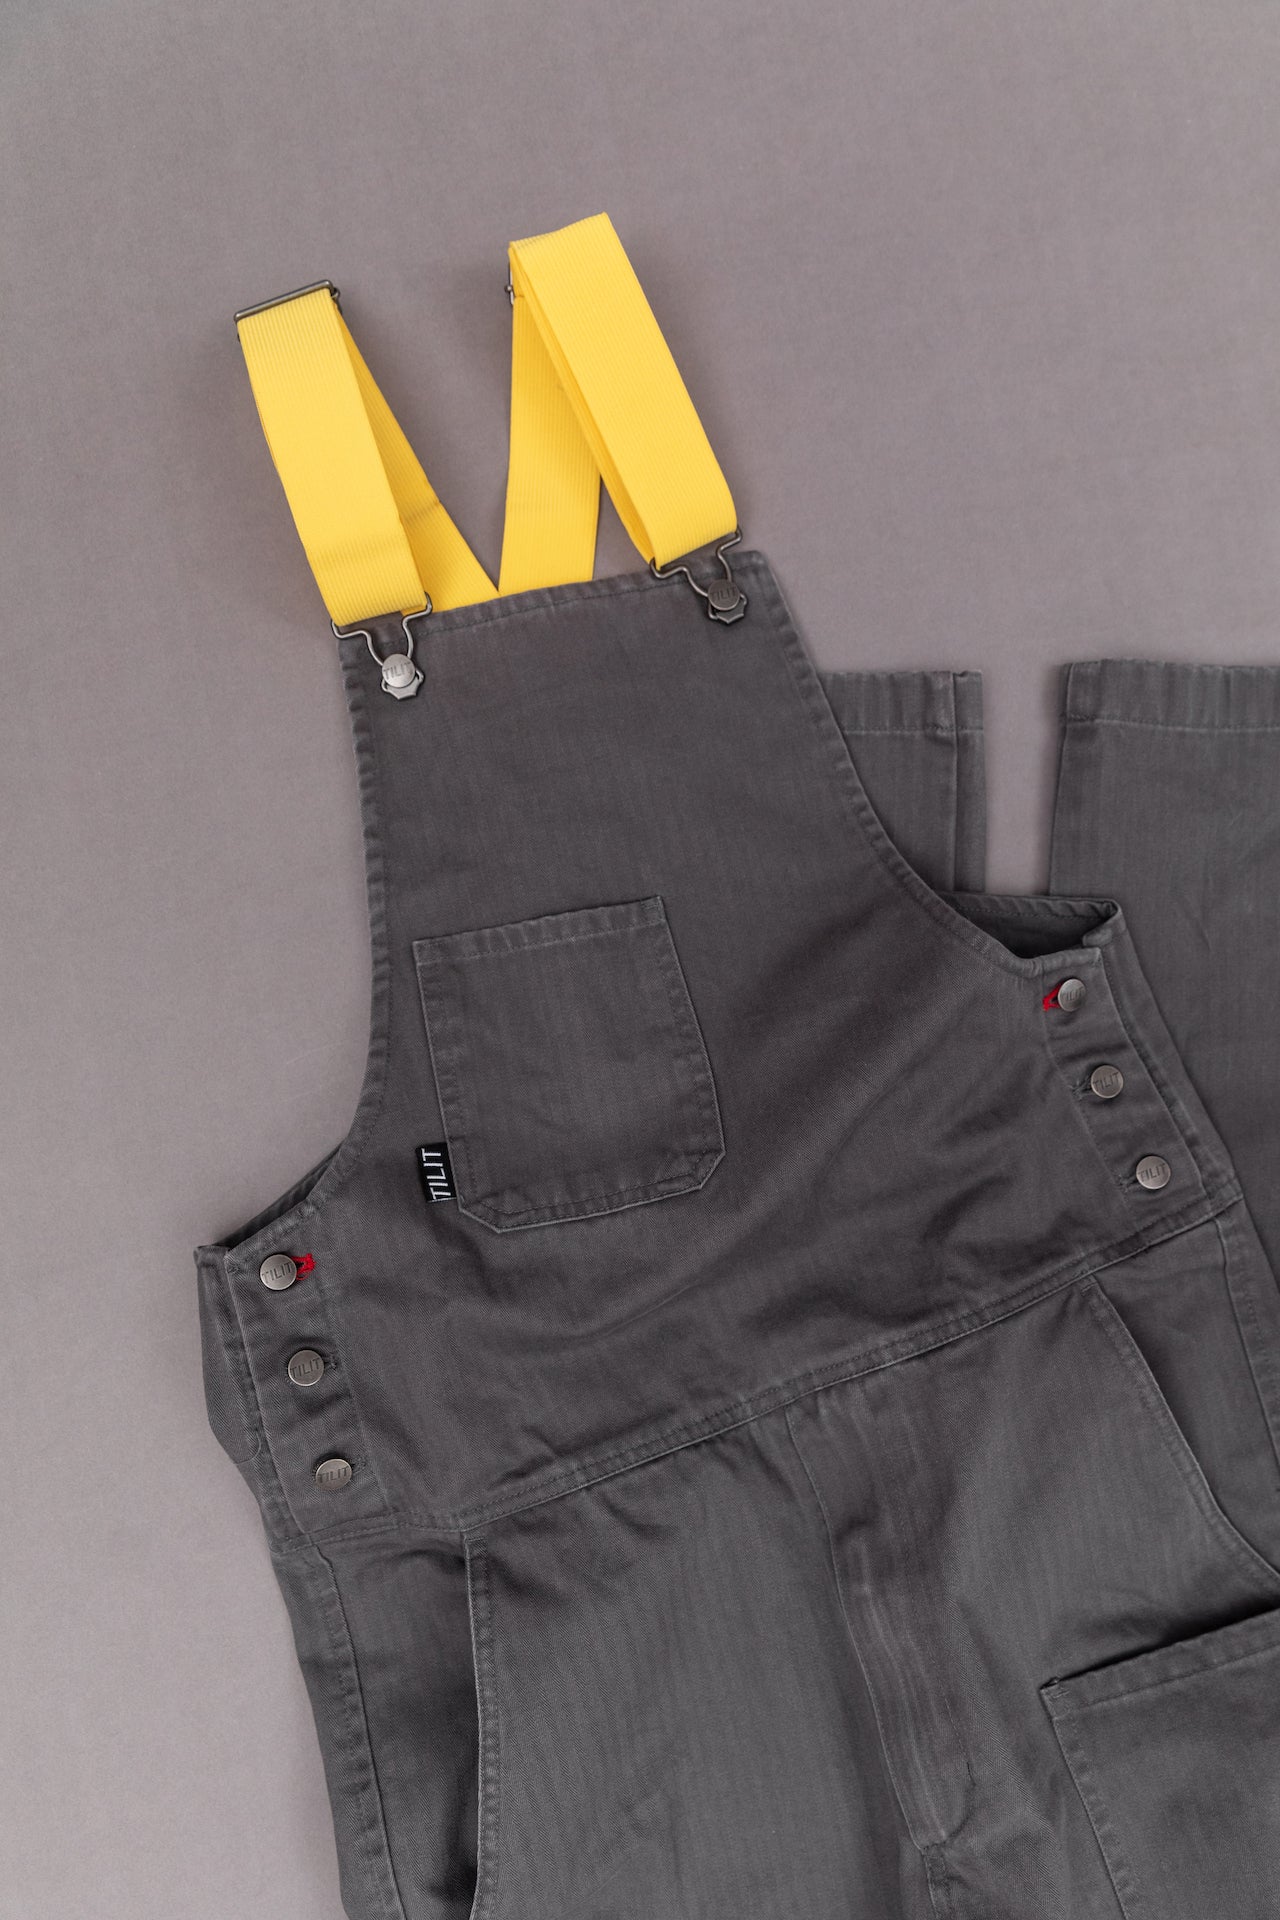 aprons with neon strap